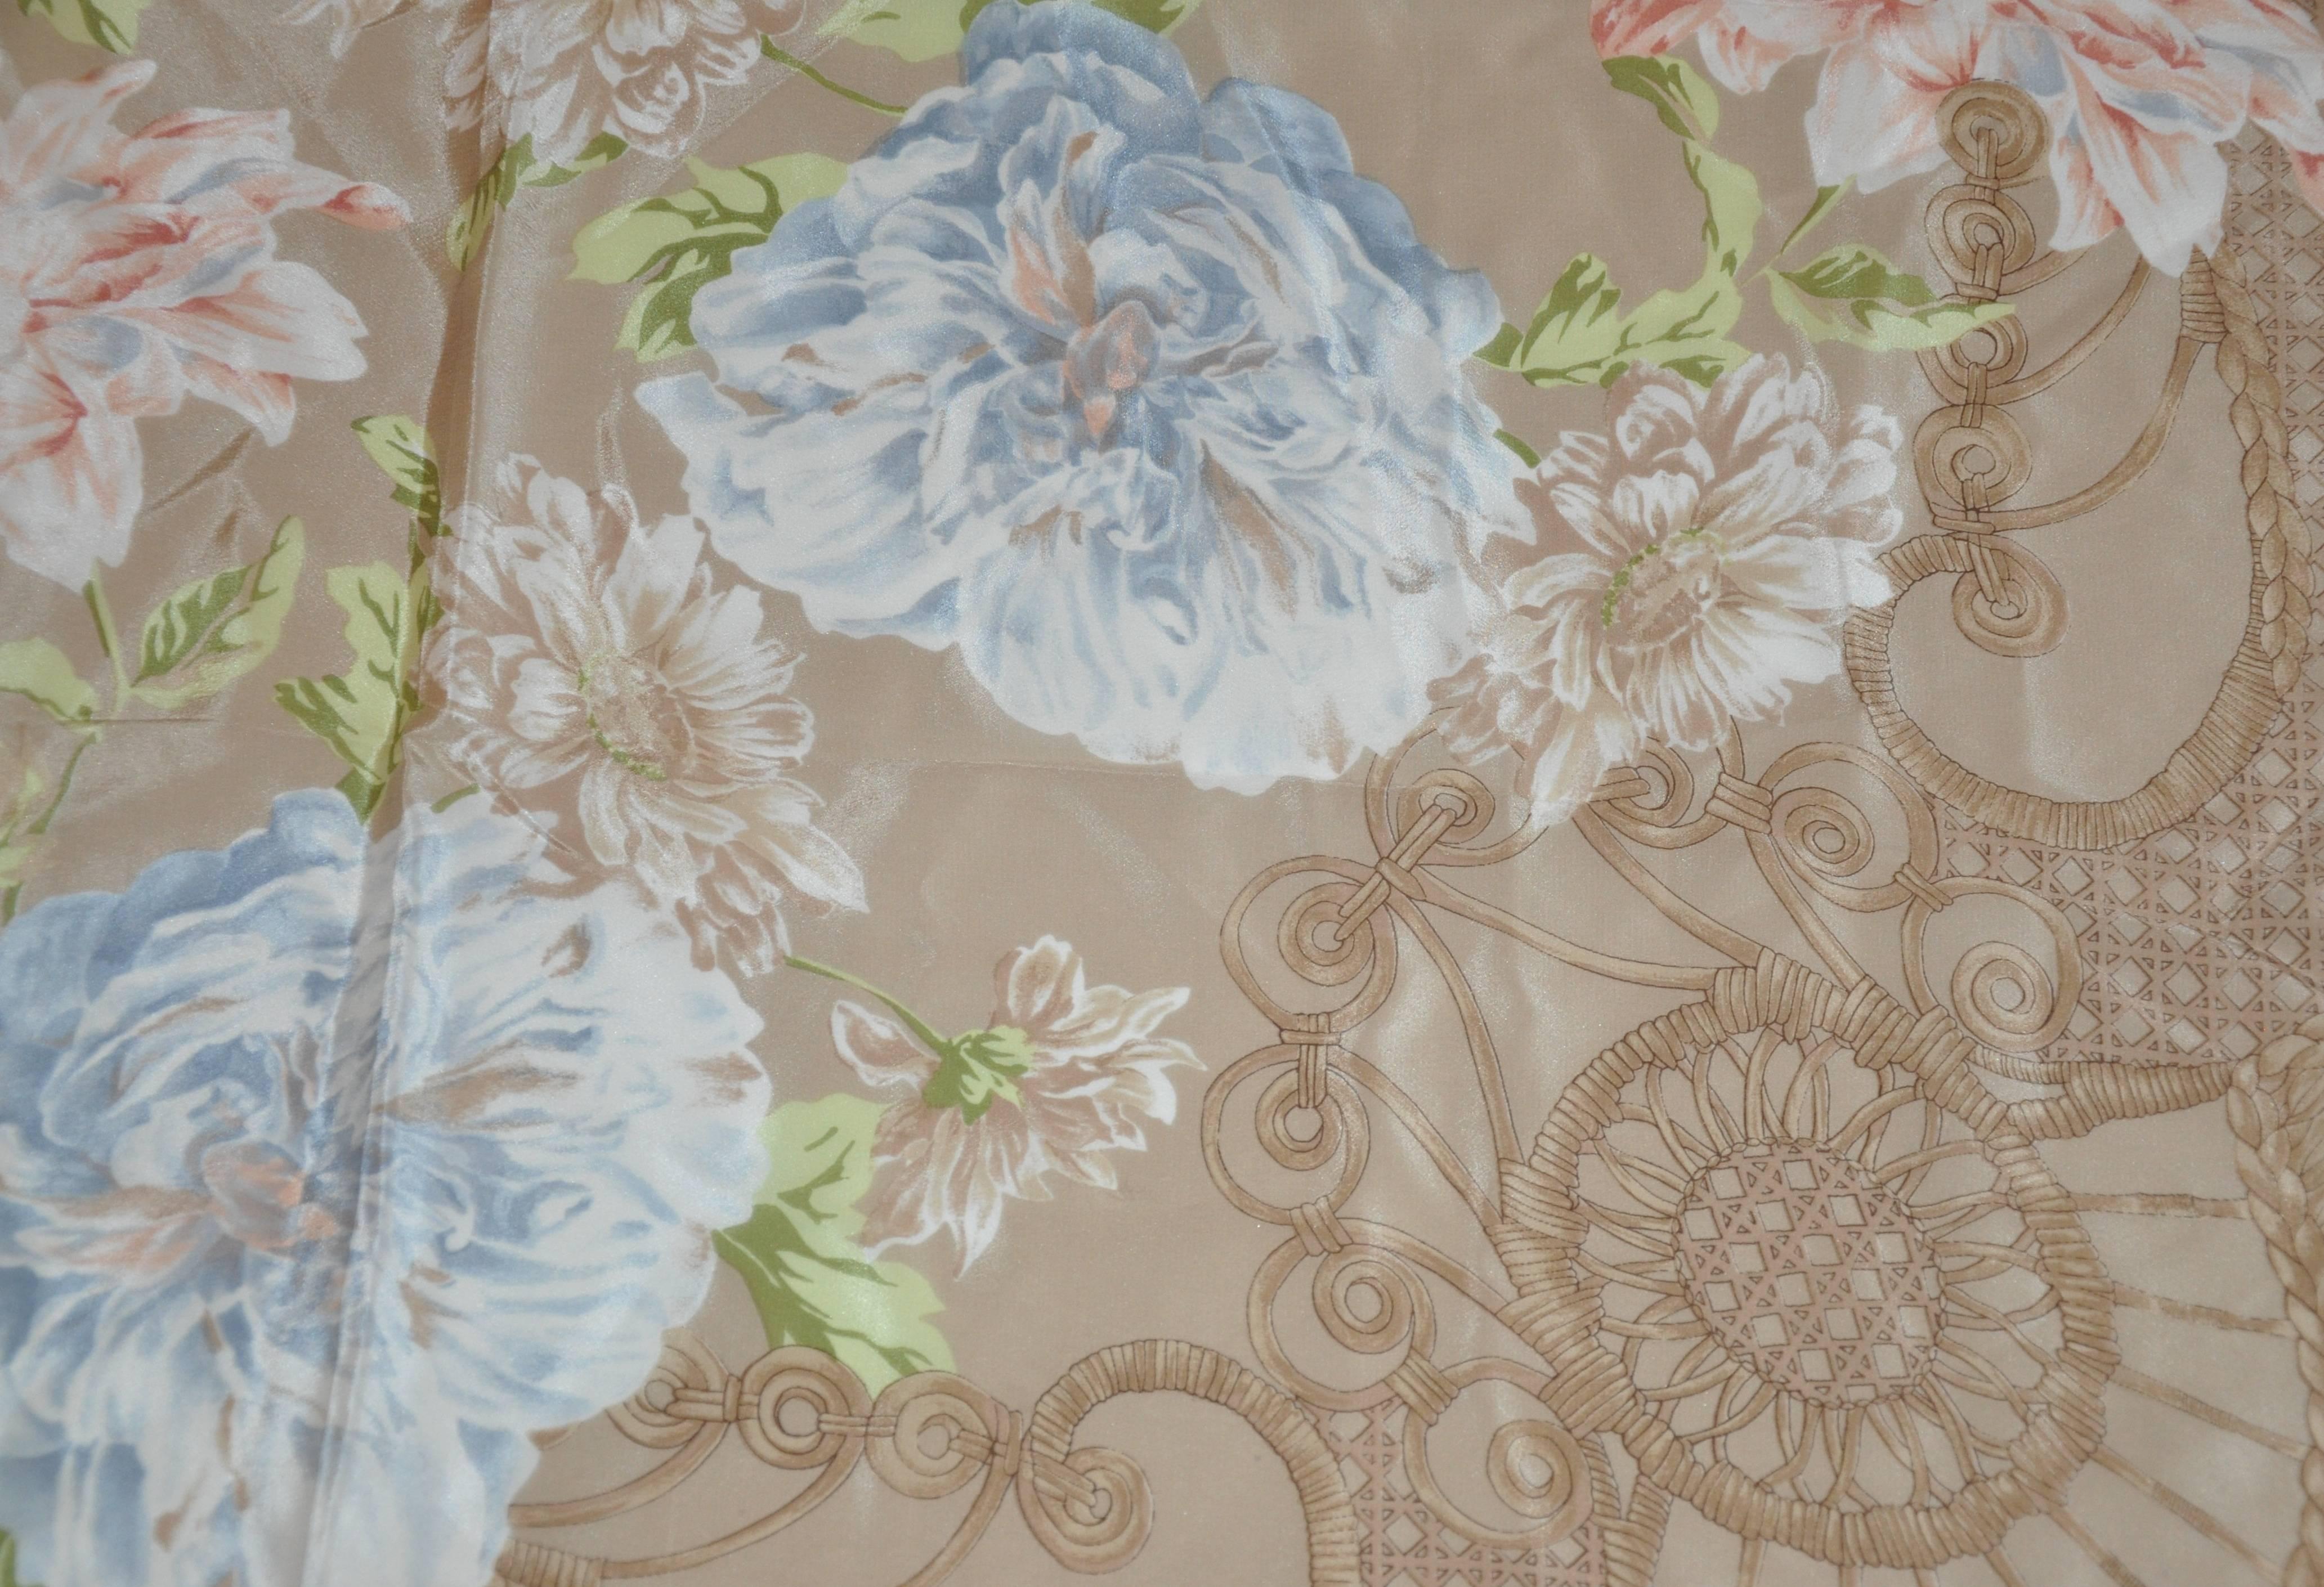         Liz Claiborne taupe multi-floral print silk scarf is finished with hand-rolled edges and measures 30